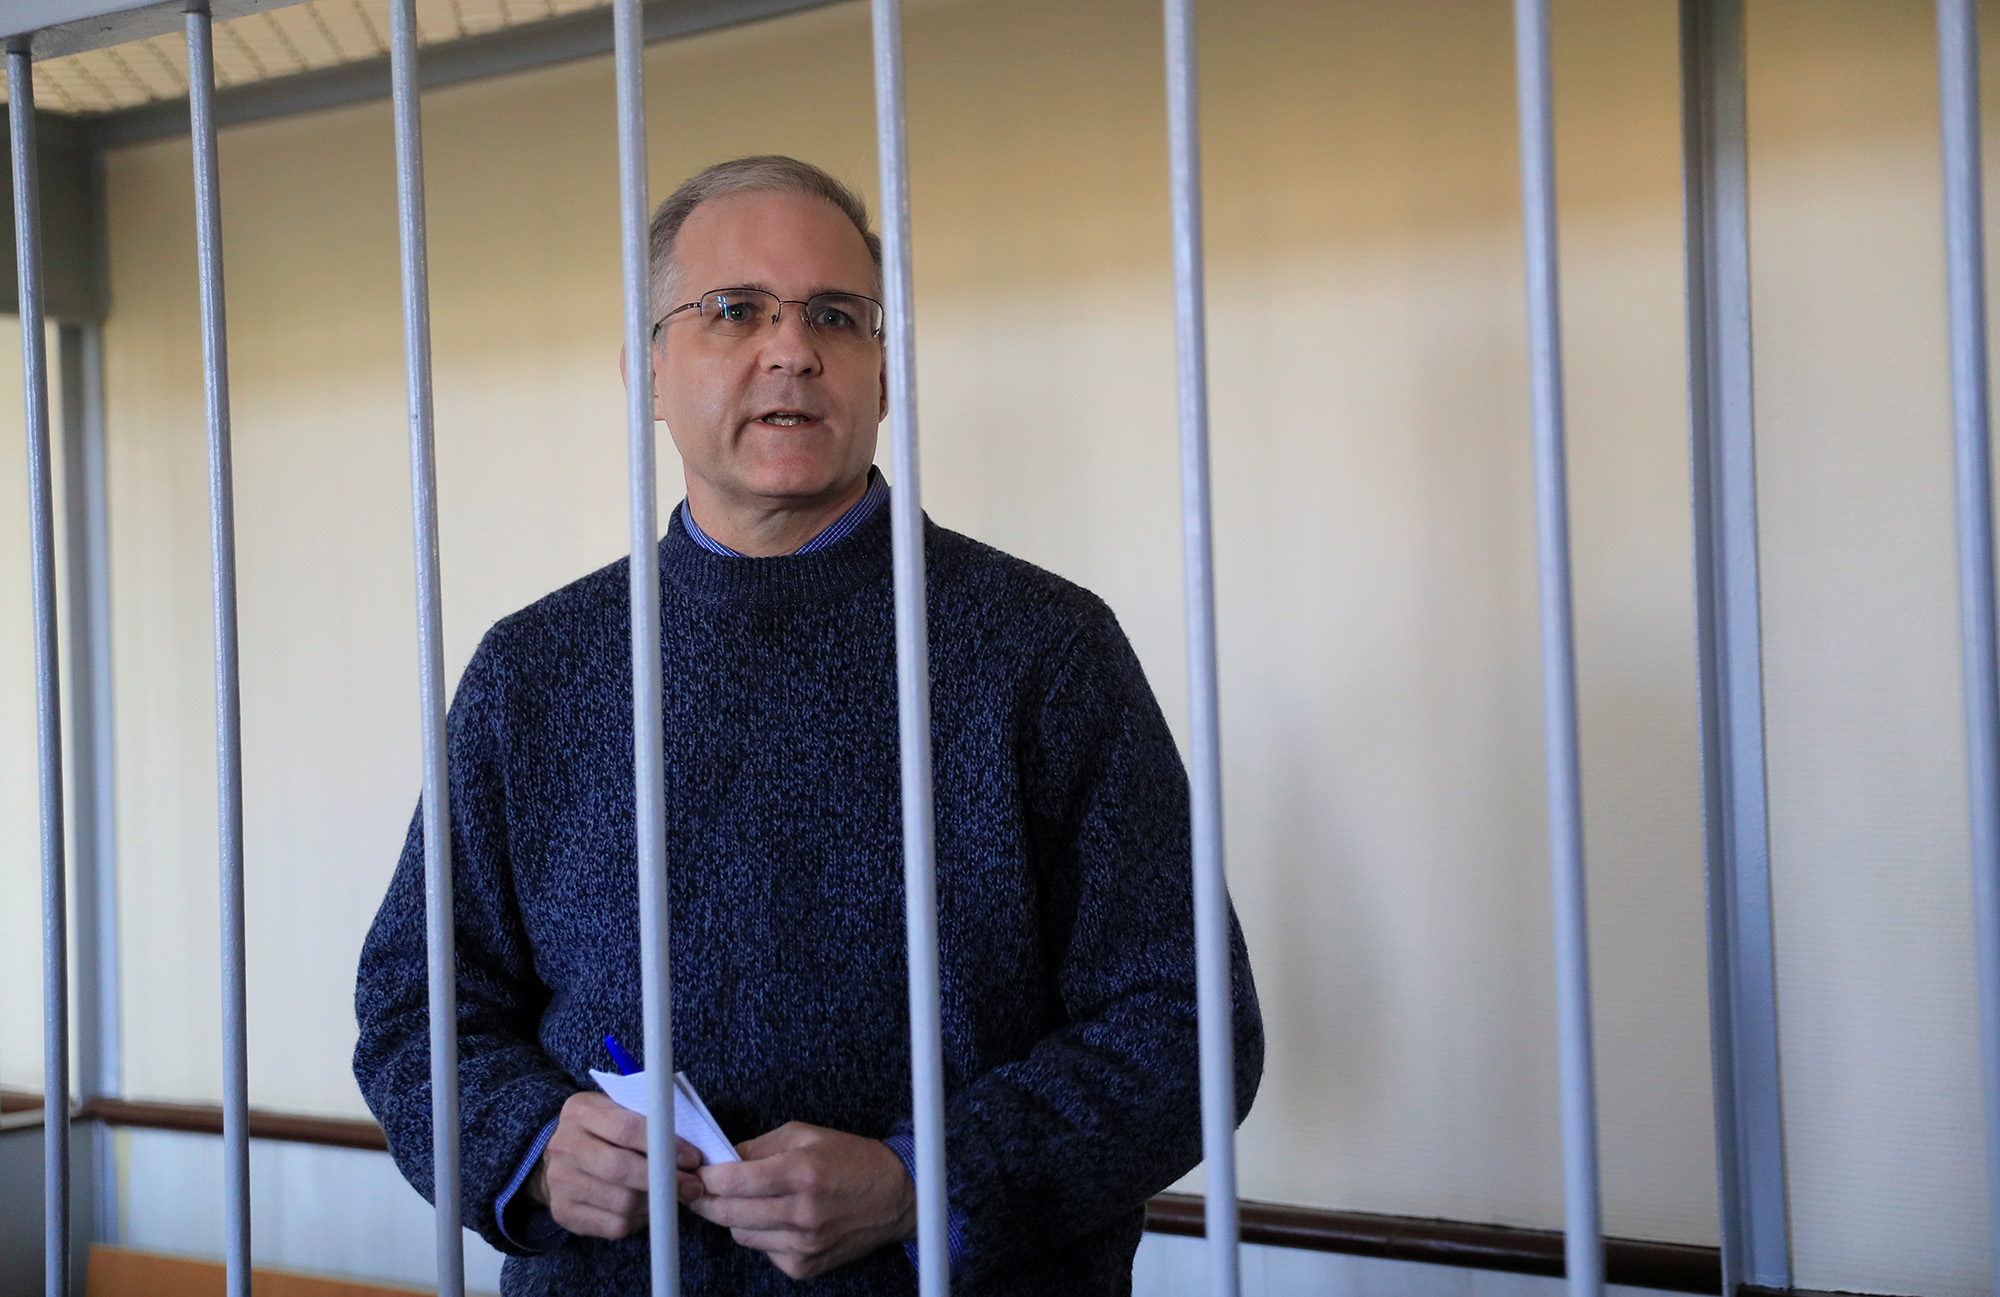 Former U.S. Marine Paul Whelan, who was detained and accused of espionage, stands inside a defendants' cage before a court hearing in Moscow, Russia, on August 23, 2019.